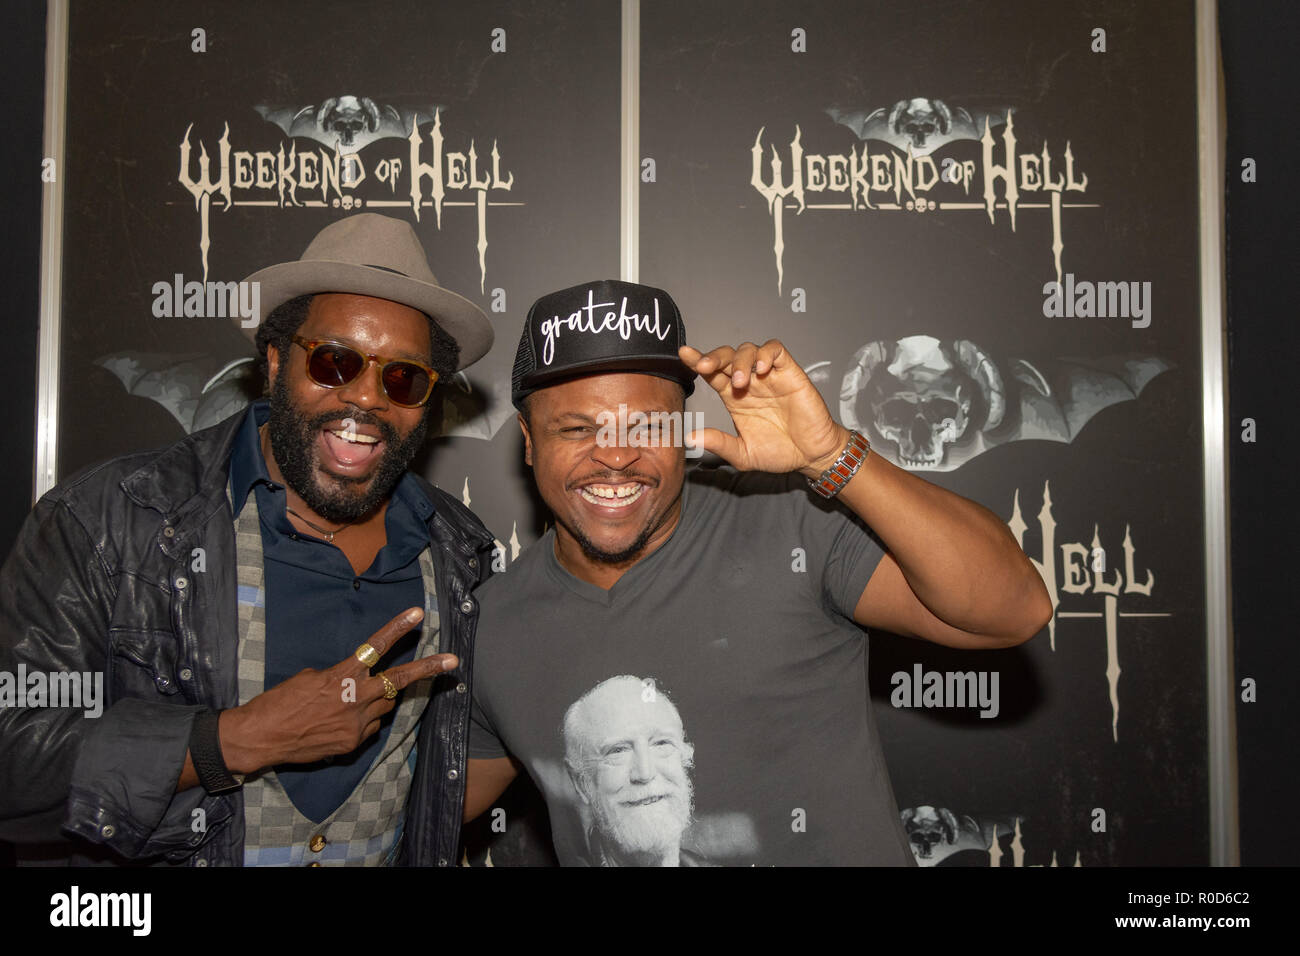 Dortmund, Germany. 3rd November, 2018. Chad L. Coleman and IronE Singleton at Weekend of Hell 2018, a two day (November 3-4 2018) horror-themed fan convention. Credit: Markus Wissmann/Alamy Live News Stock Photo